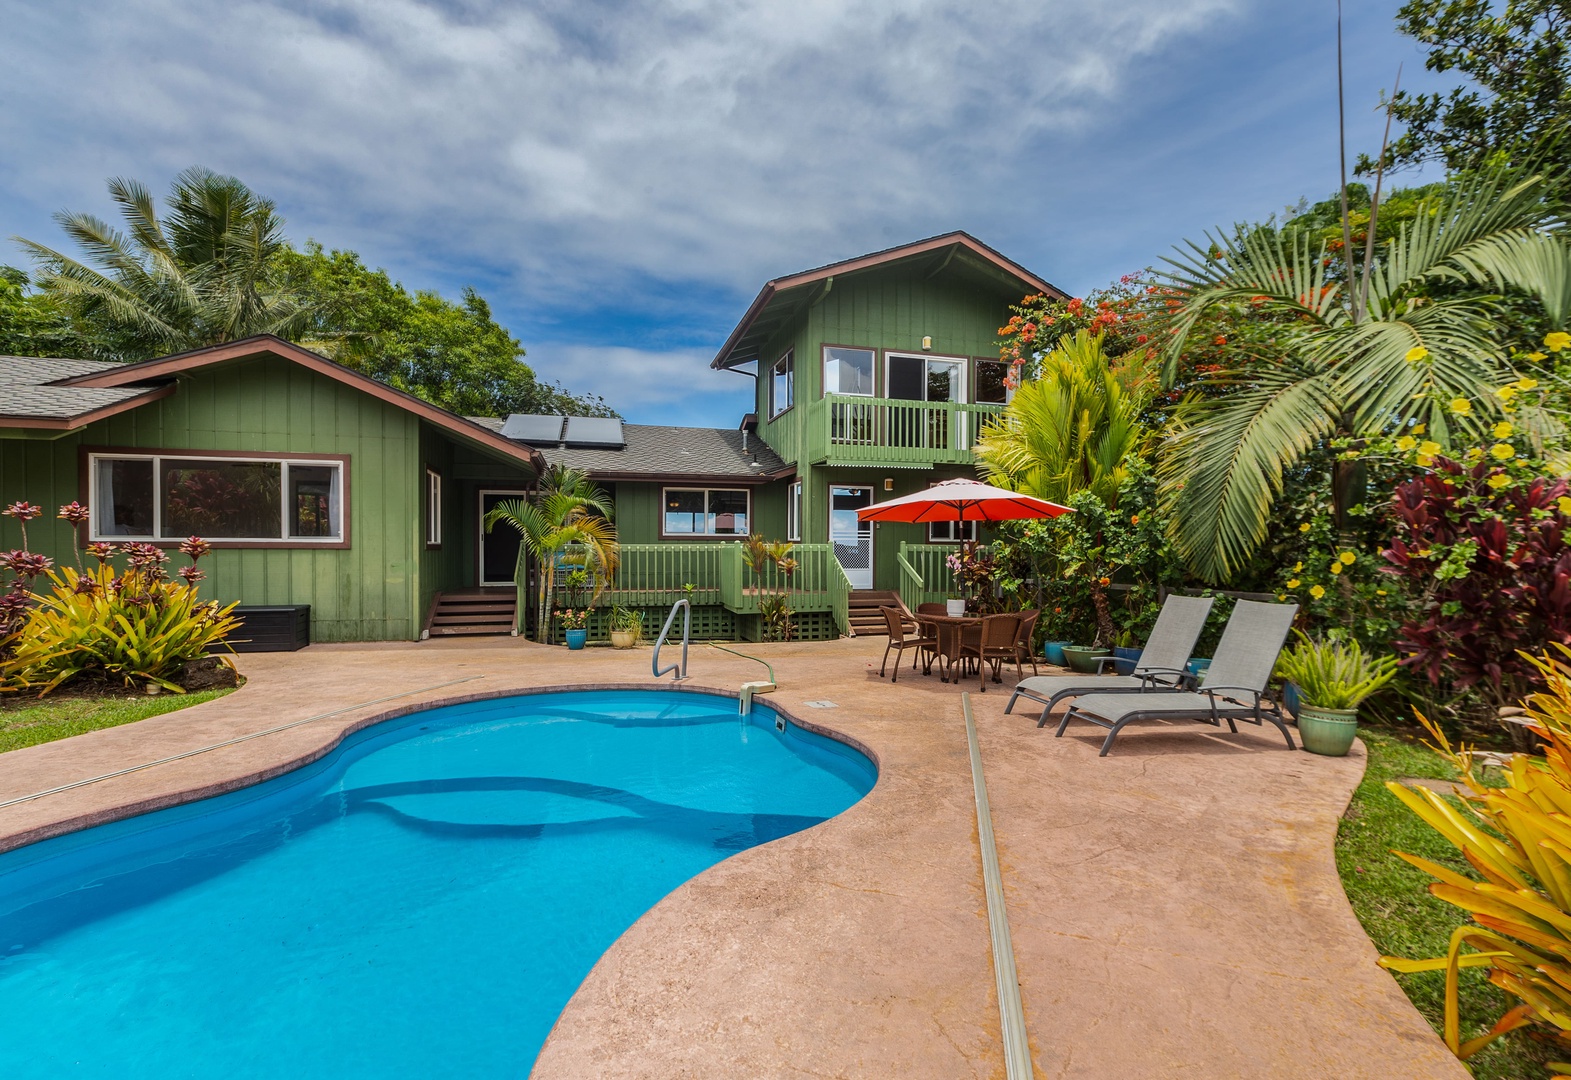 Princeville Vacation Rentals, Hale Ohia - Soak up the sun poolside or jump in for a refreshing swim in the private pool